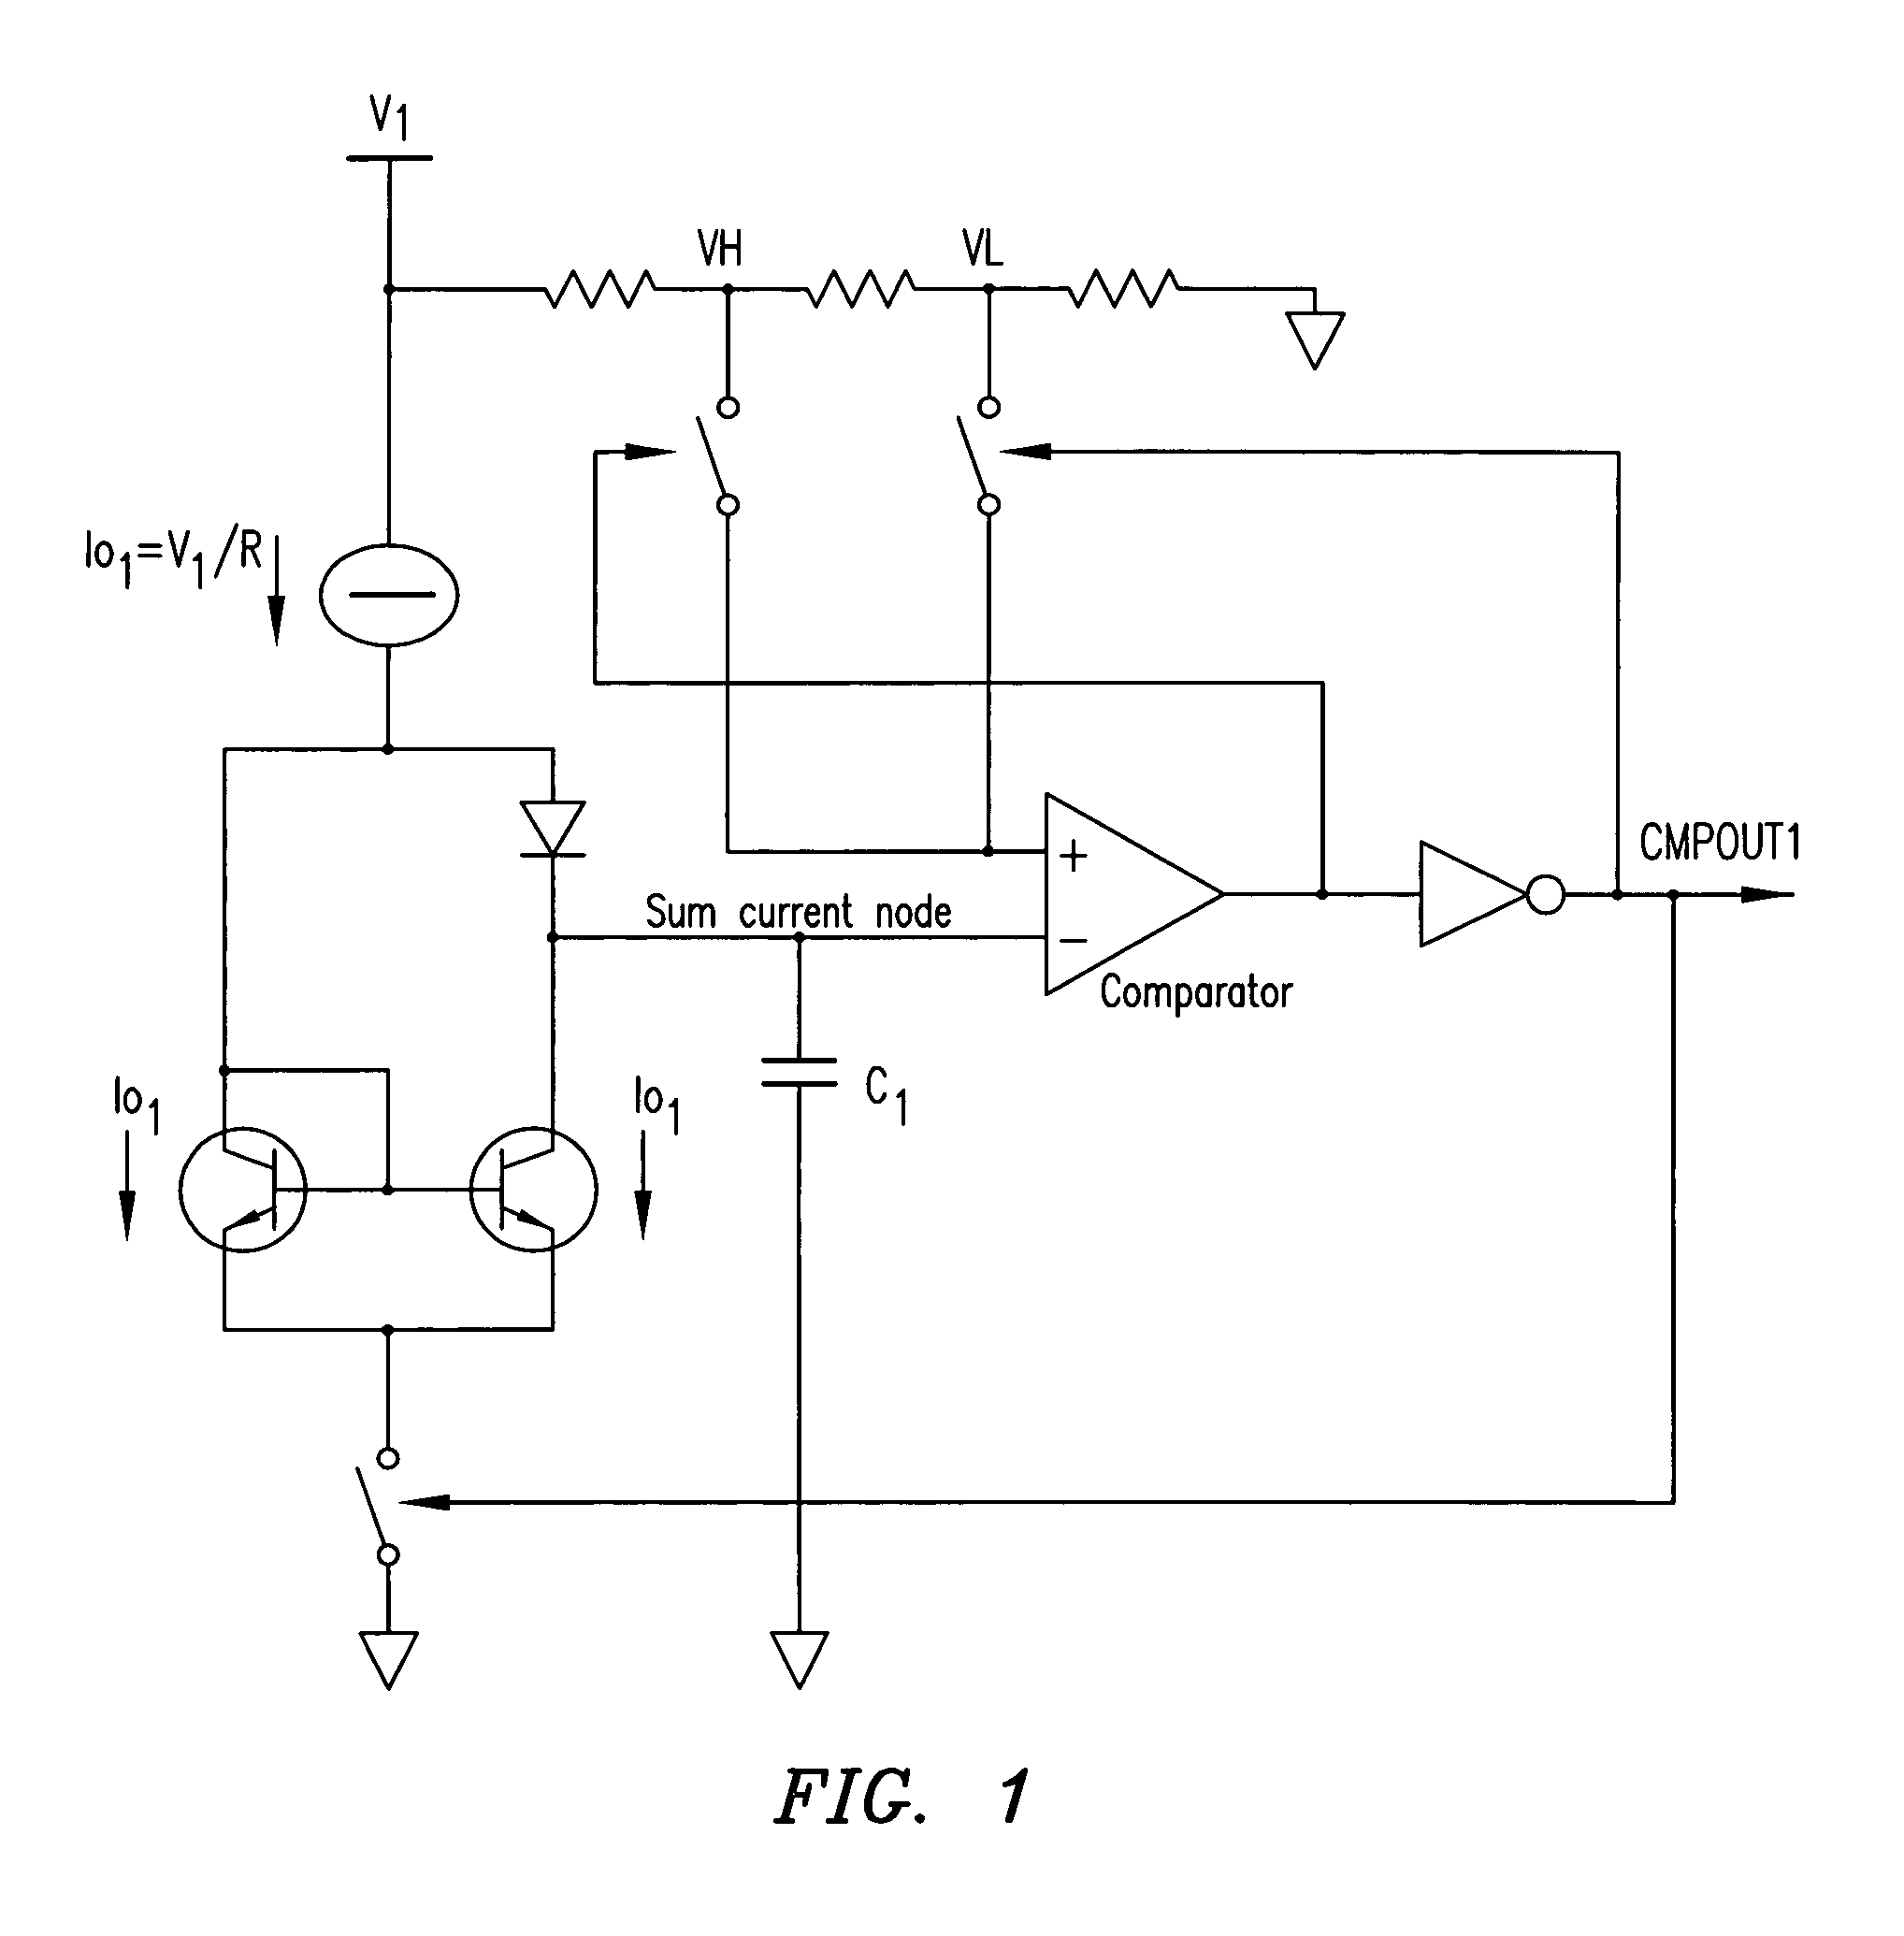 Precision relaxation oscillator without comparator delay errors